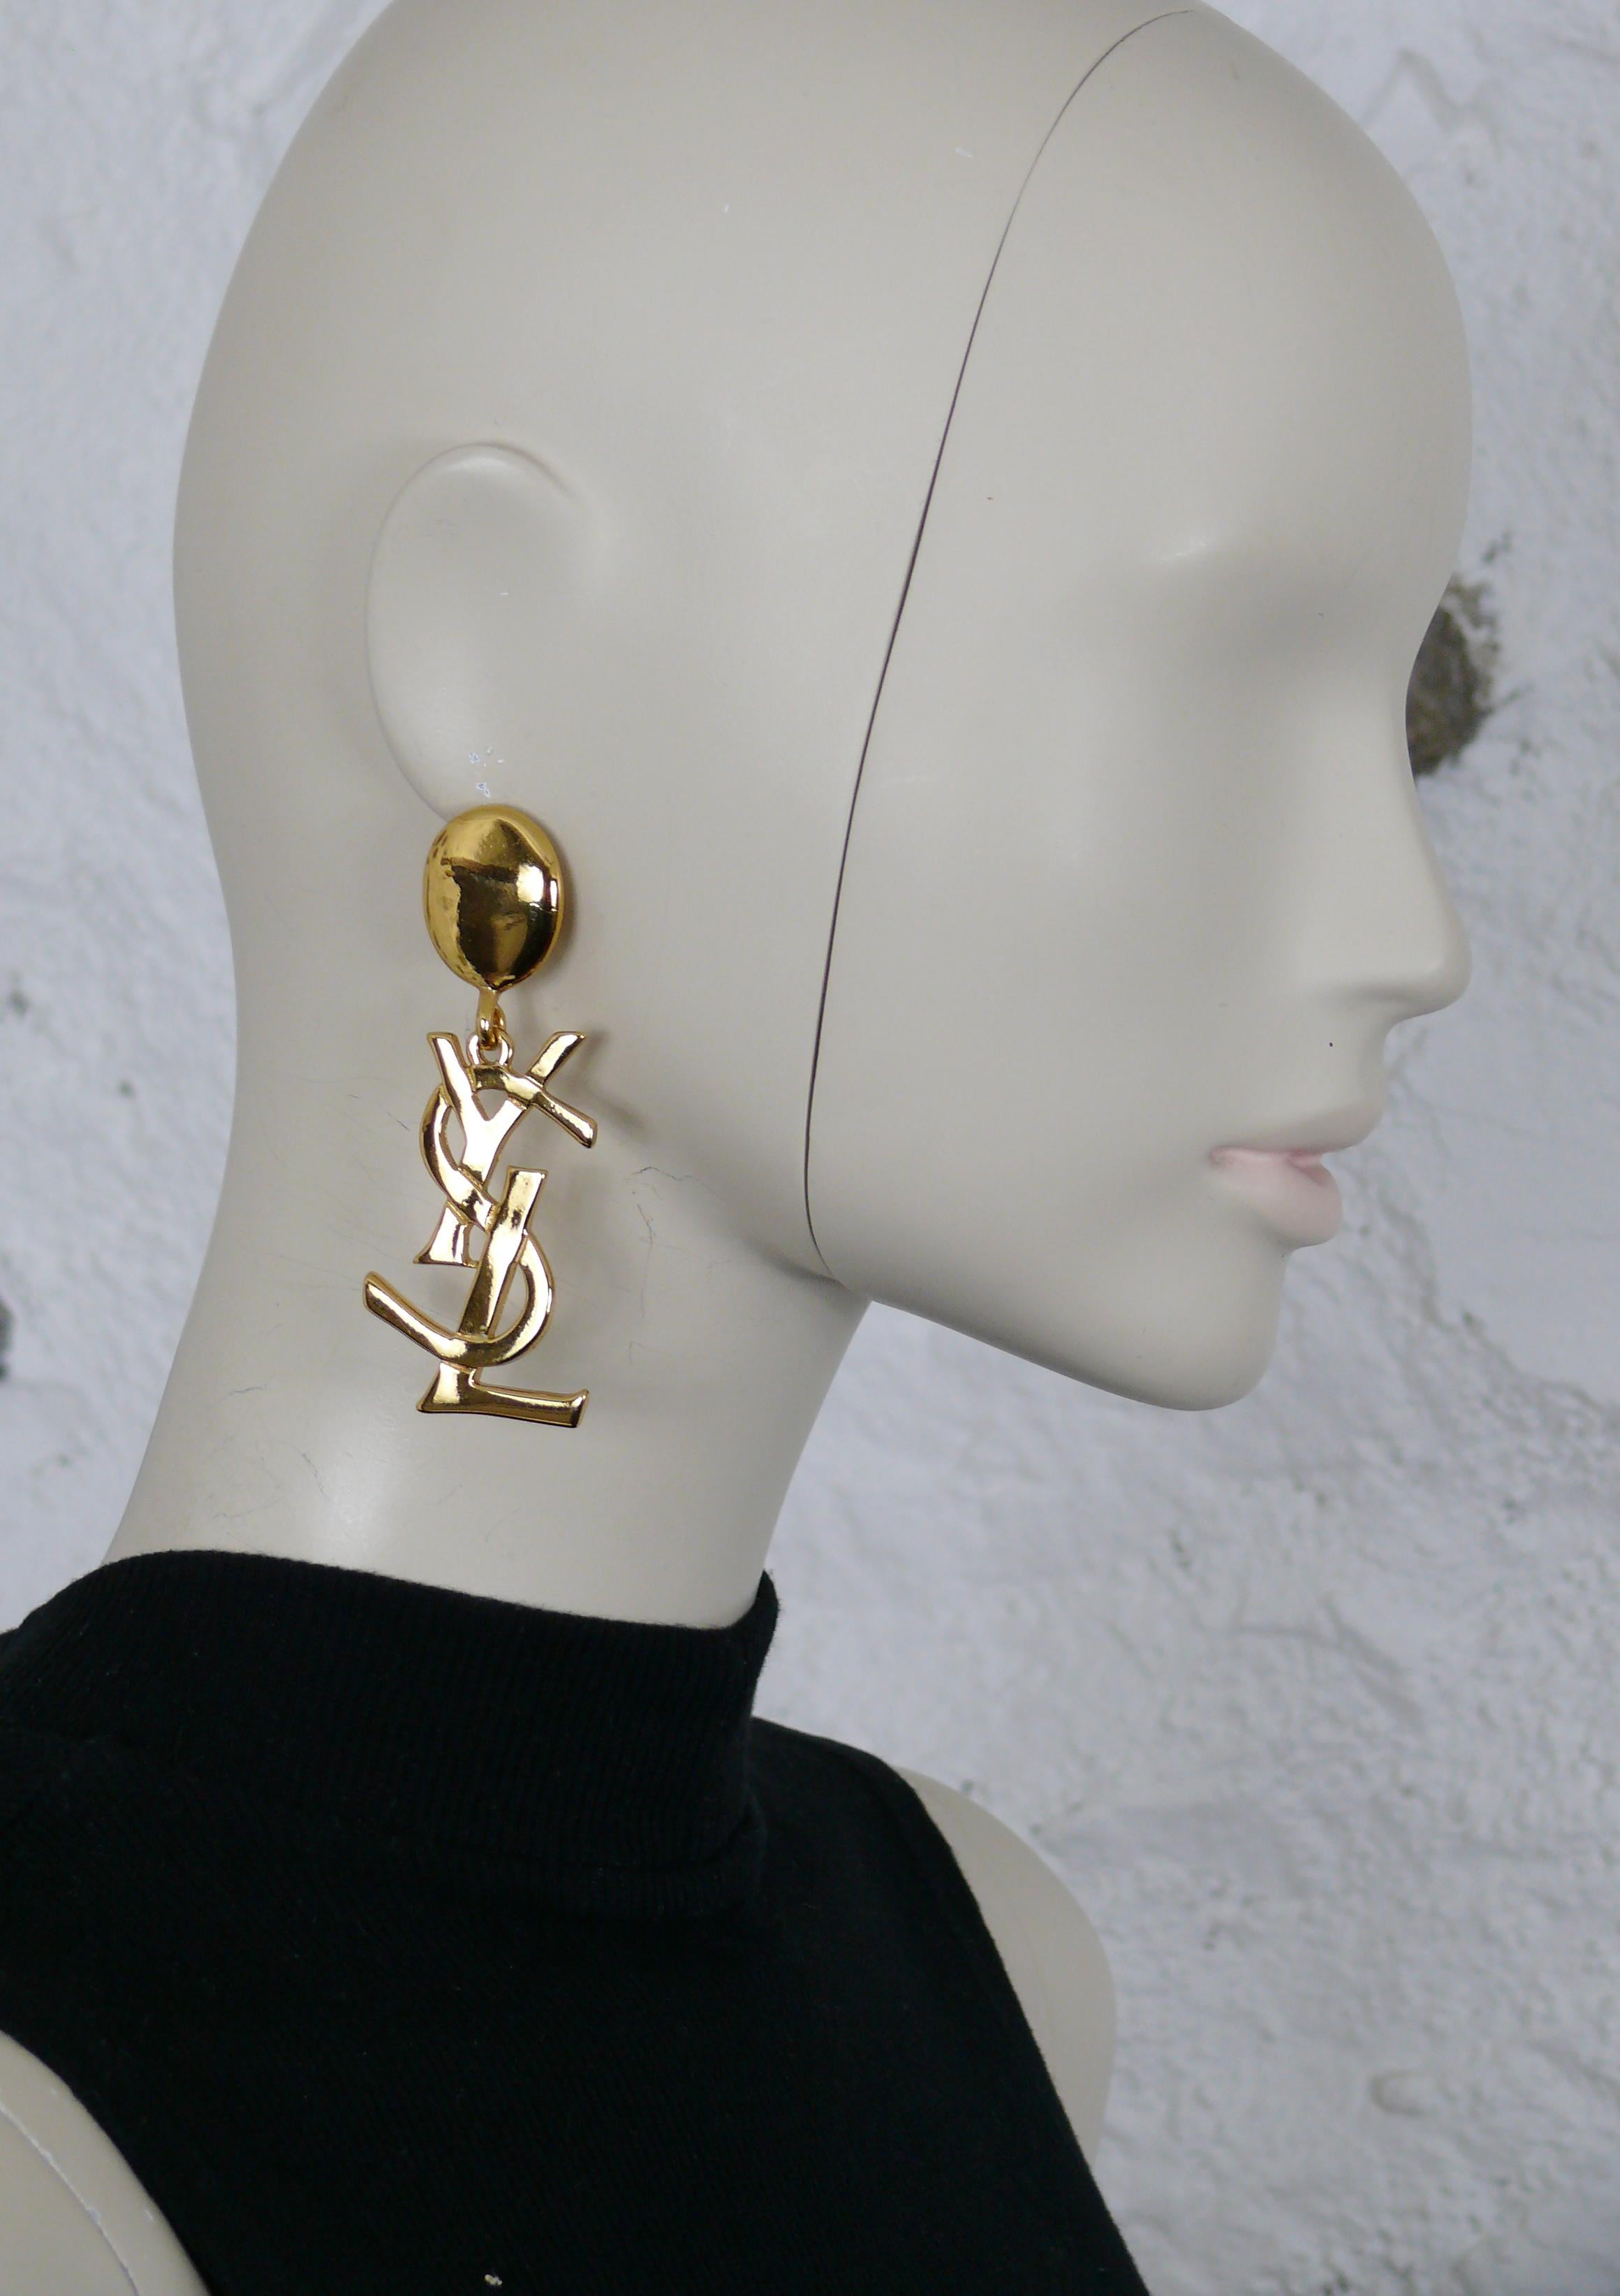 YVES SAINT LAURENT massive vintage gold toned iconic dangling earrings (clip on) featuring YSL logo.

Rare and collectable item.

Embossed YSL Made in France.

Indicative measurements : length approx. 8.1 cm (approx. 3.19 inches) / max. width